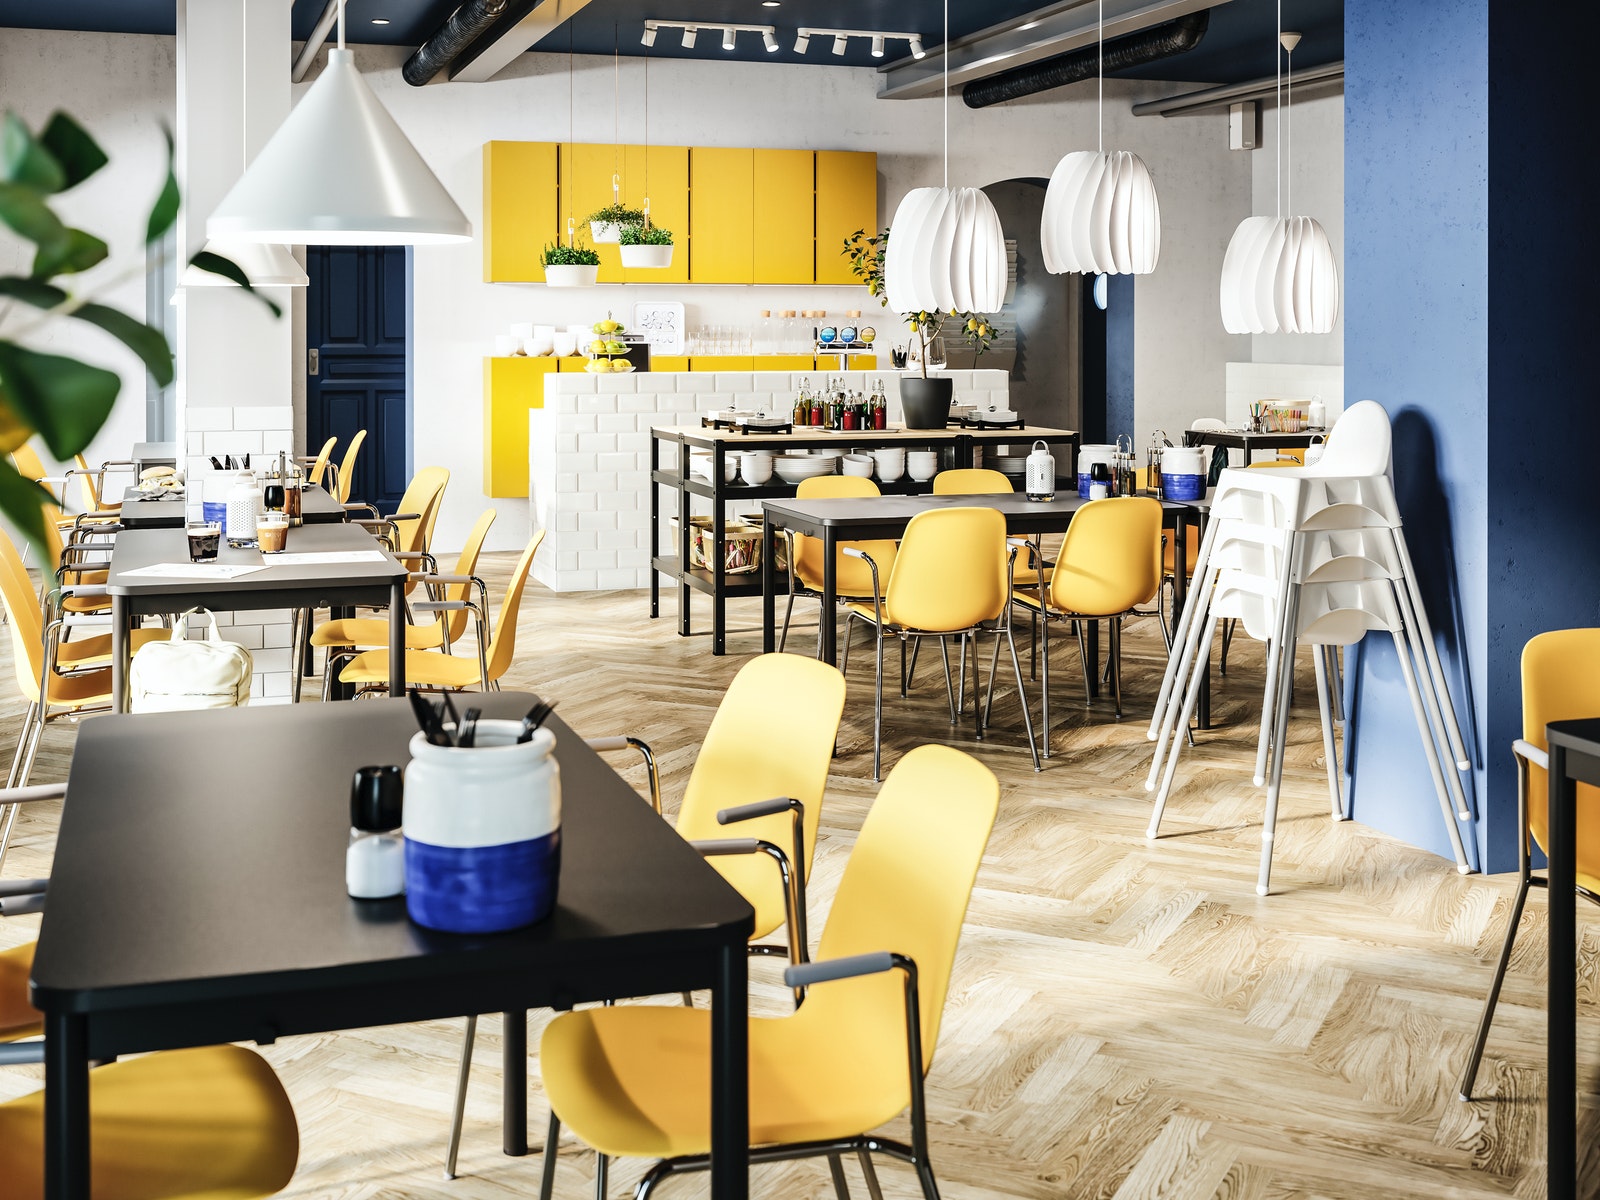 IKEA - A bright and welcoming restaurant